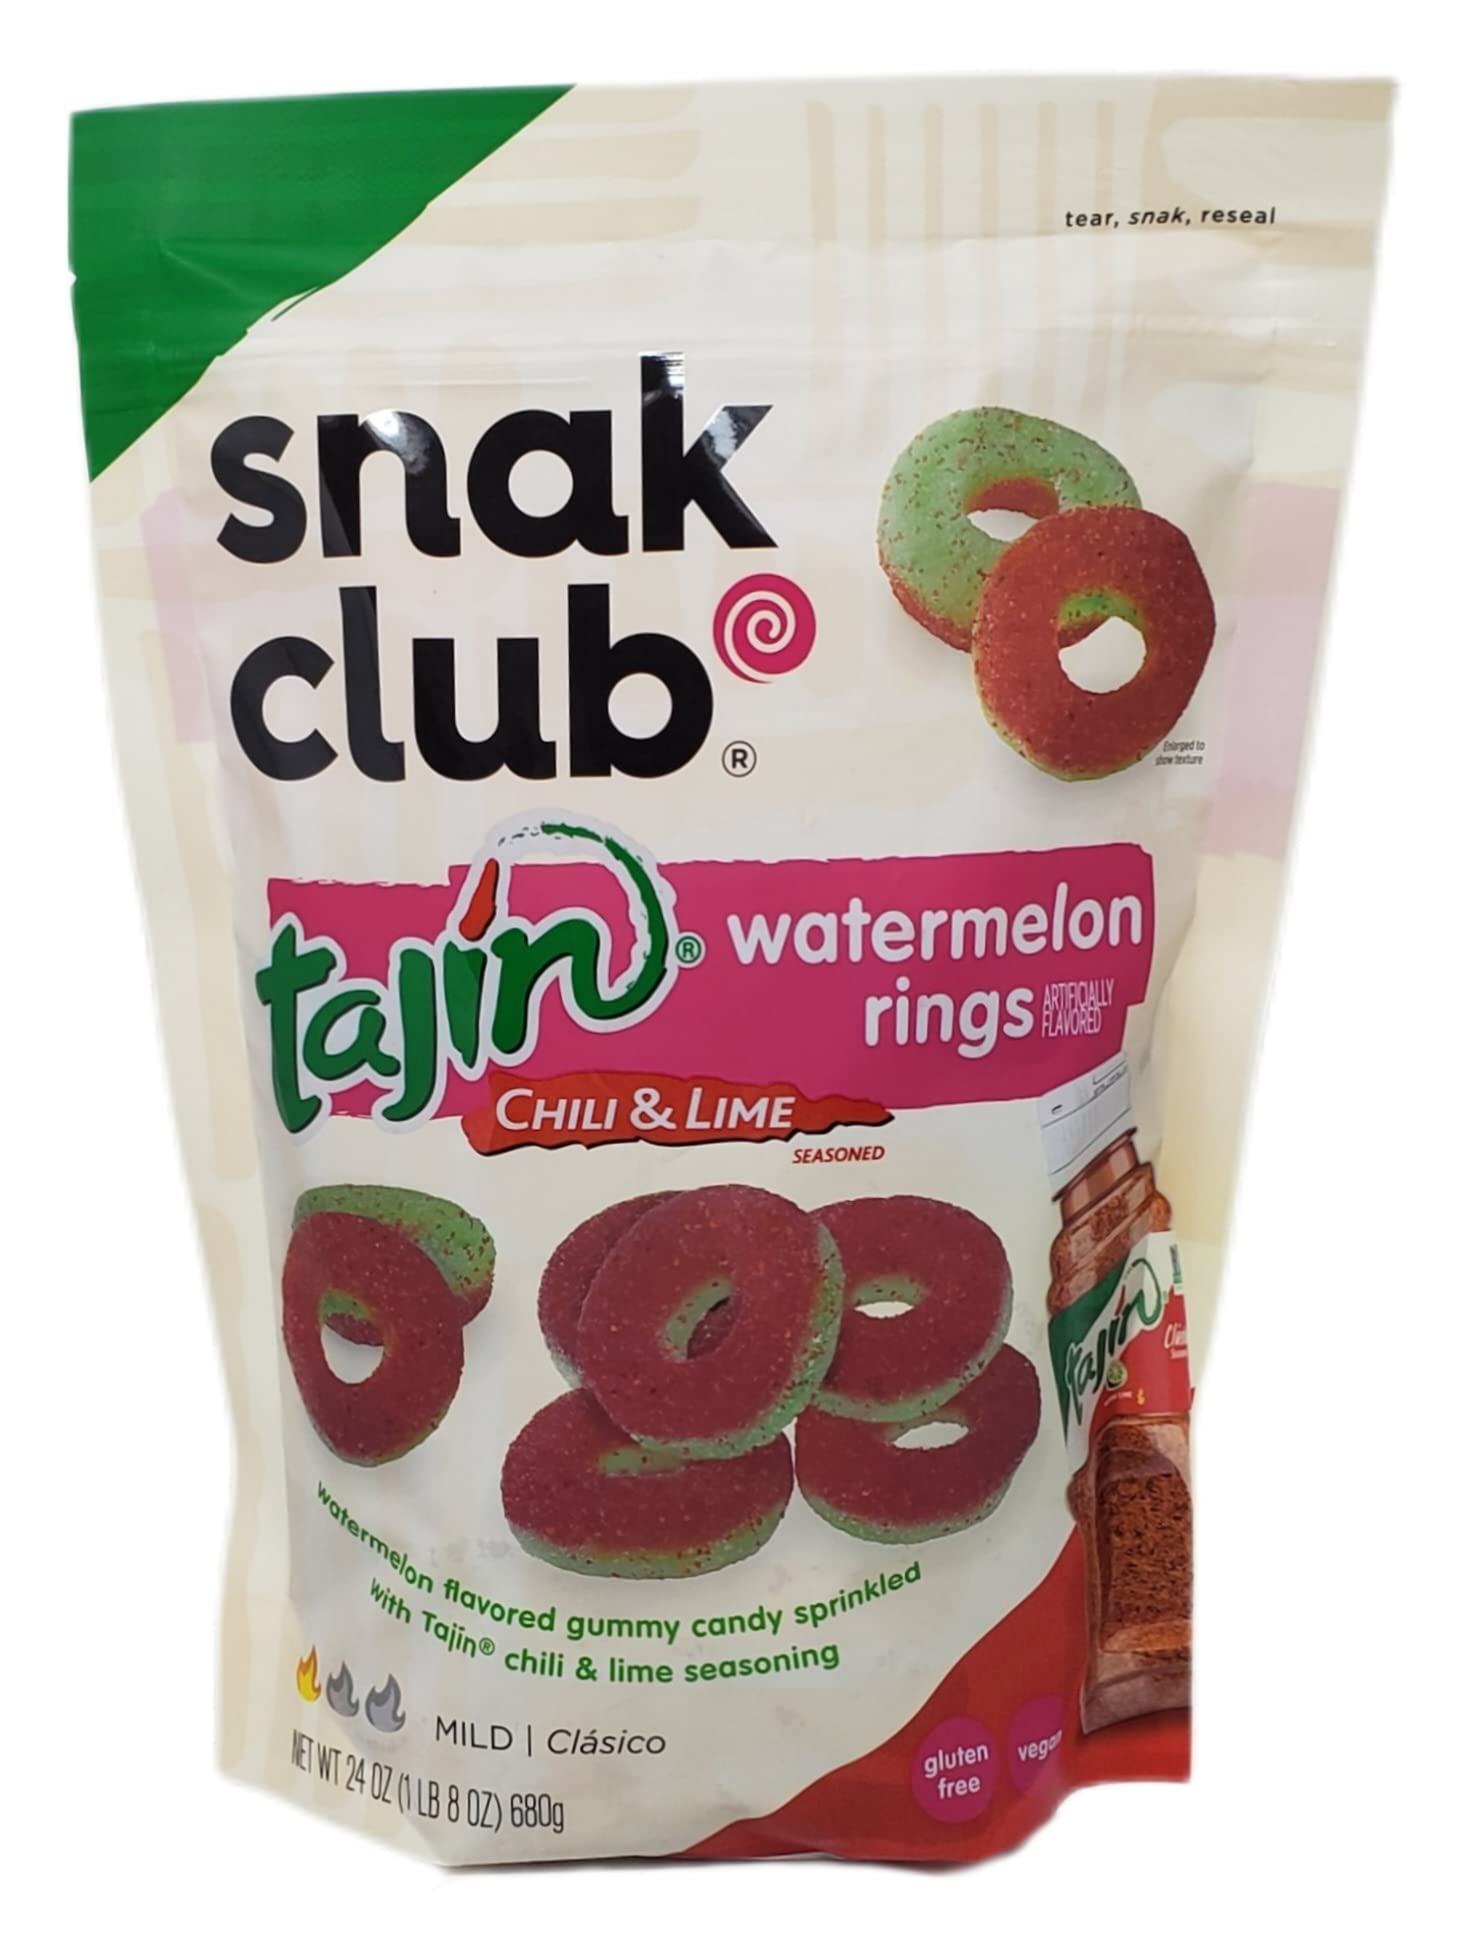 Mua Snak Club Tajin Clasico Chili and Lime Gummy Watermelon Rings - 24 oz  Per Bag - Choose a 2 Pack or 3 Pack - Comes in Resealable Bags - Gluten Free